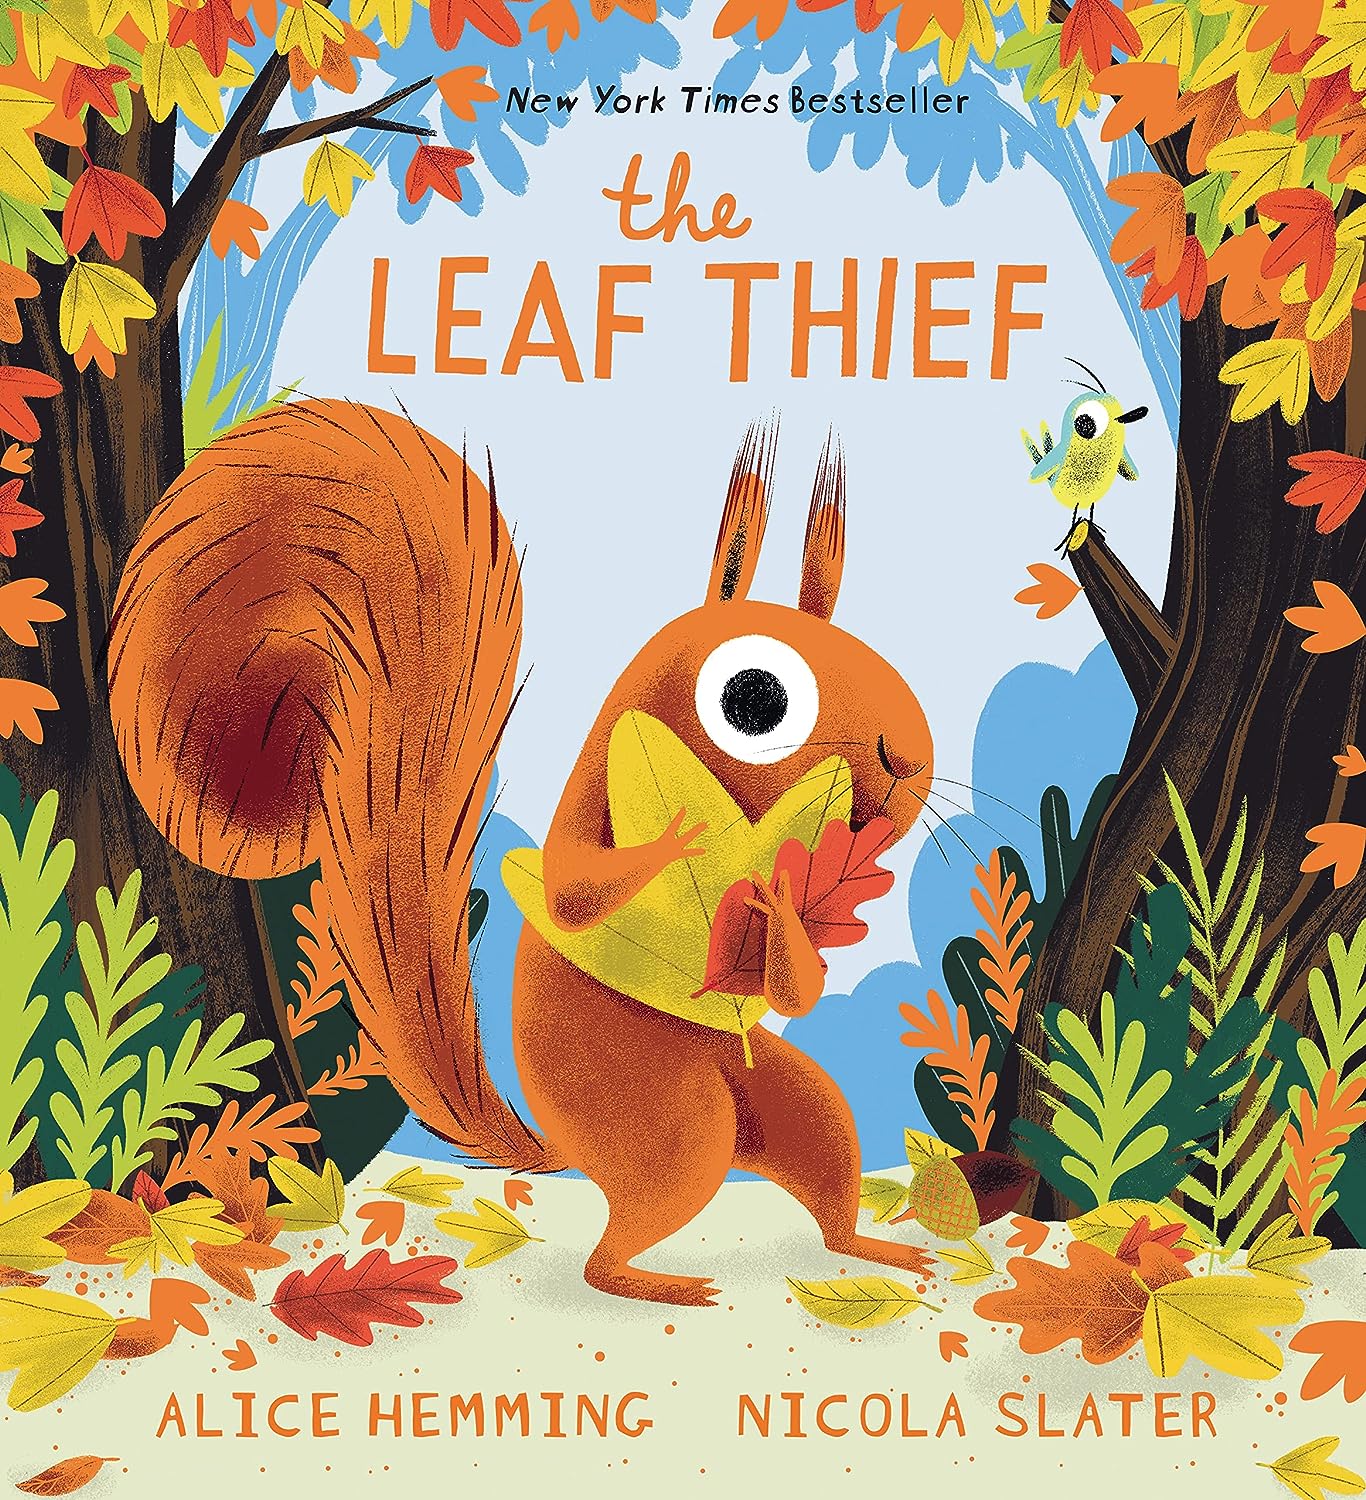 Cover of the Leaf Thief book has an orange squirrel on the cover holding a yellow leaf